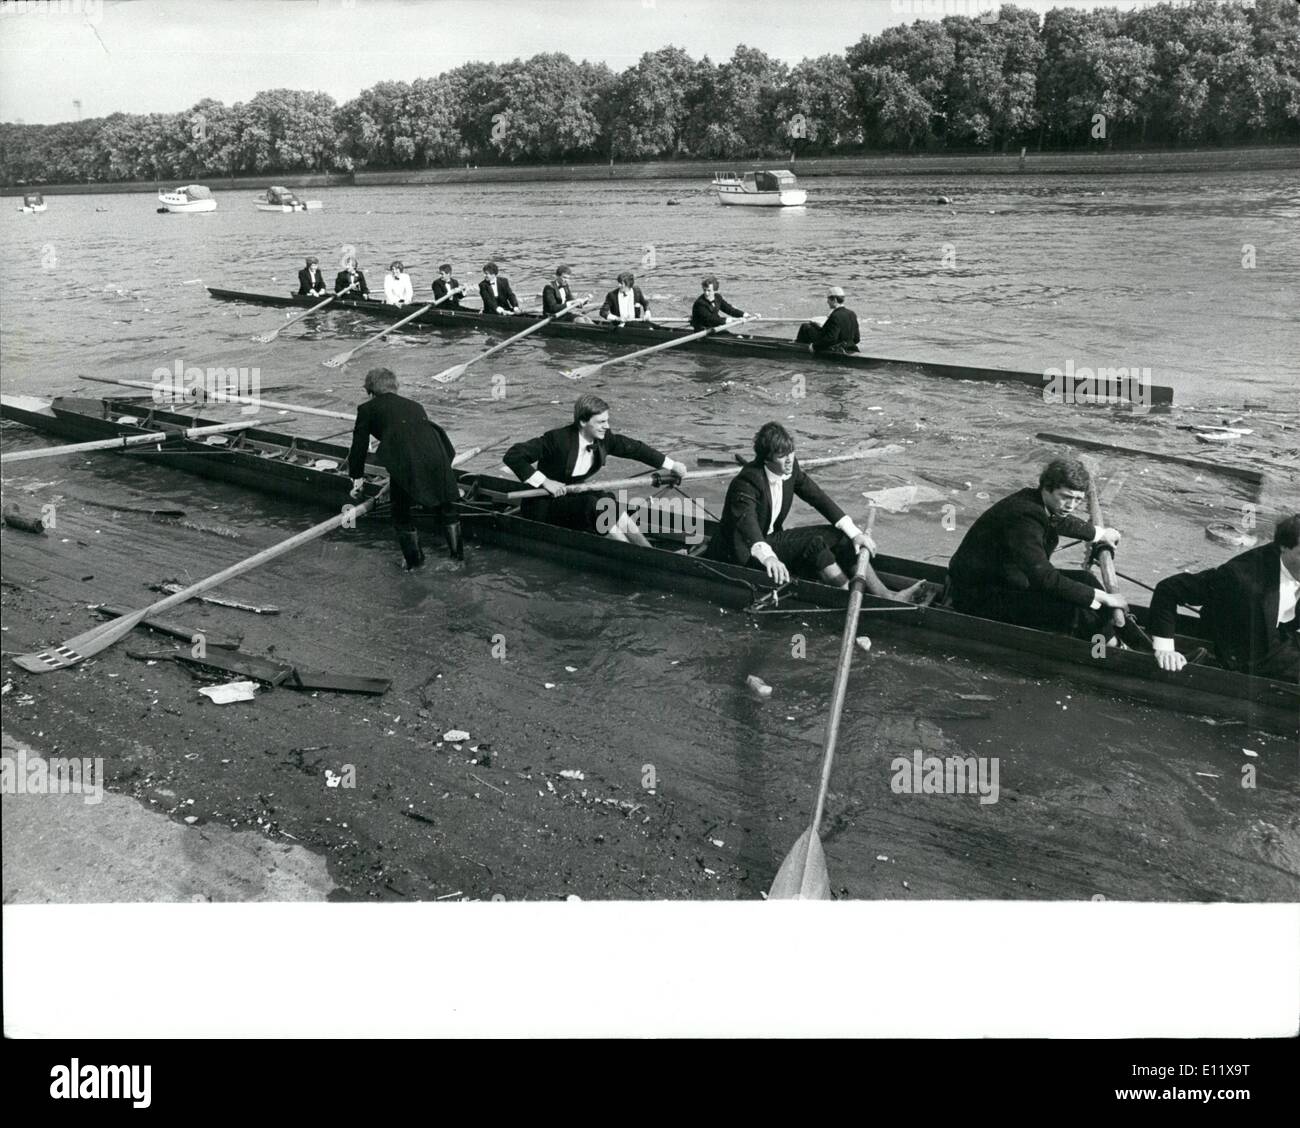 Oct. 10, 1980 - The young blades are at it again: Outside the London Rowing Club, on the Thames towpath at Payney, last Friday, Stock Photo